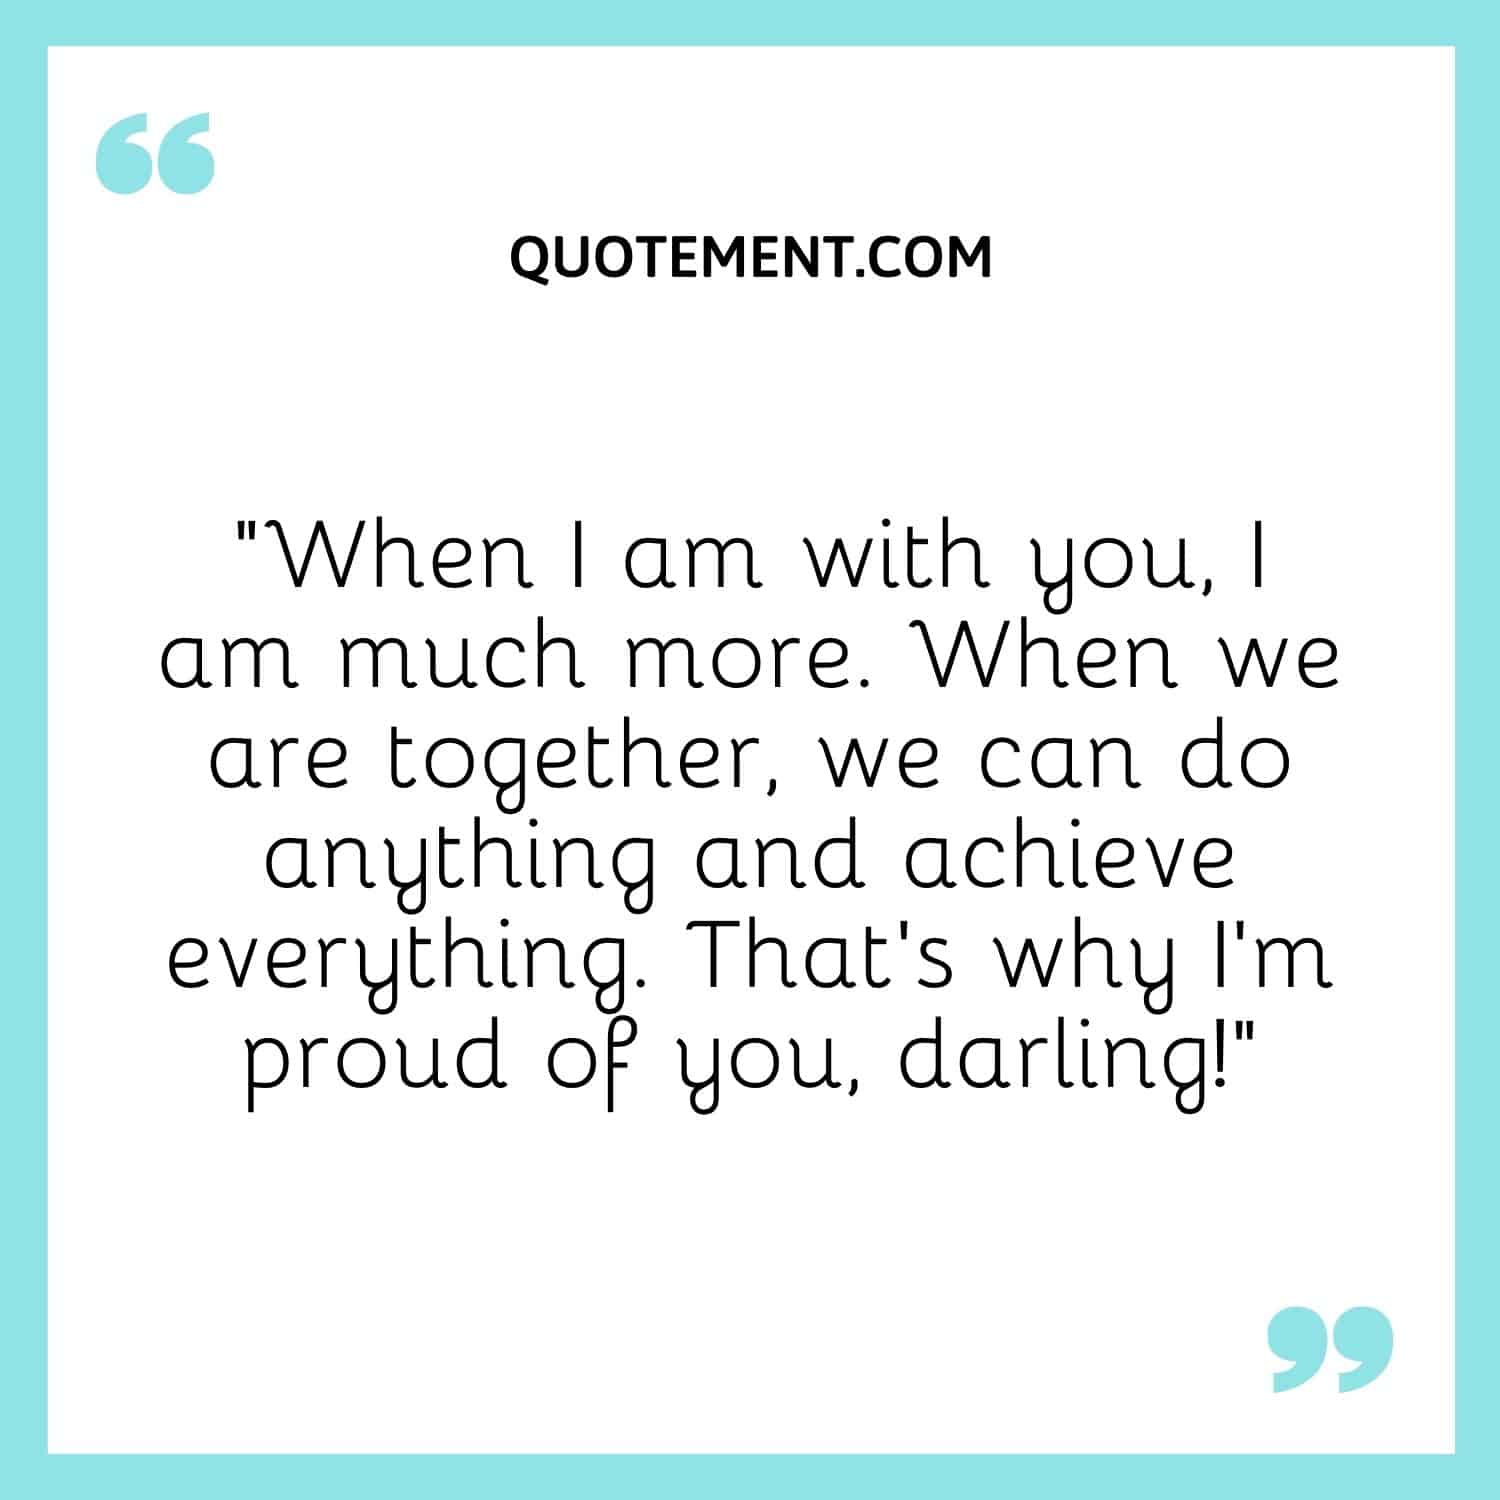 “When I am with you, I am much more. When we are together, we can do anything and achieve everything. That’s why I’m proud of you, darling!”